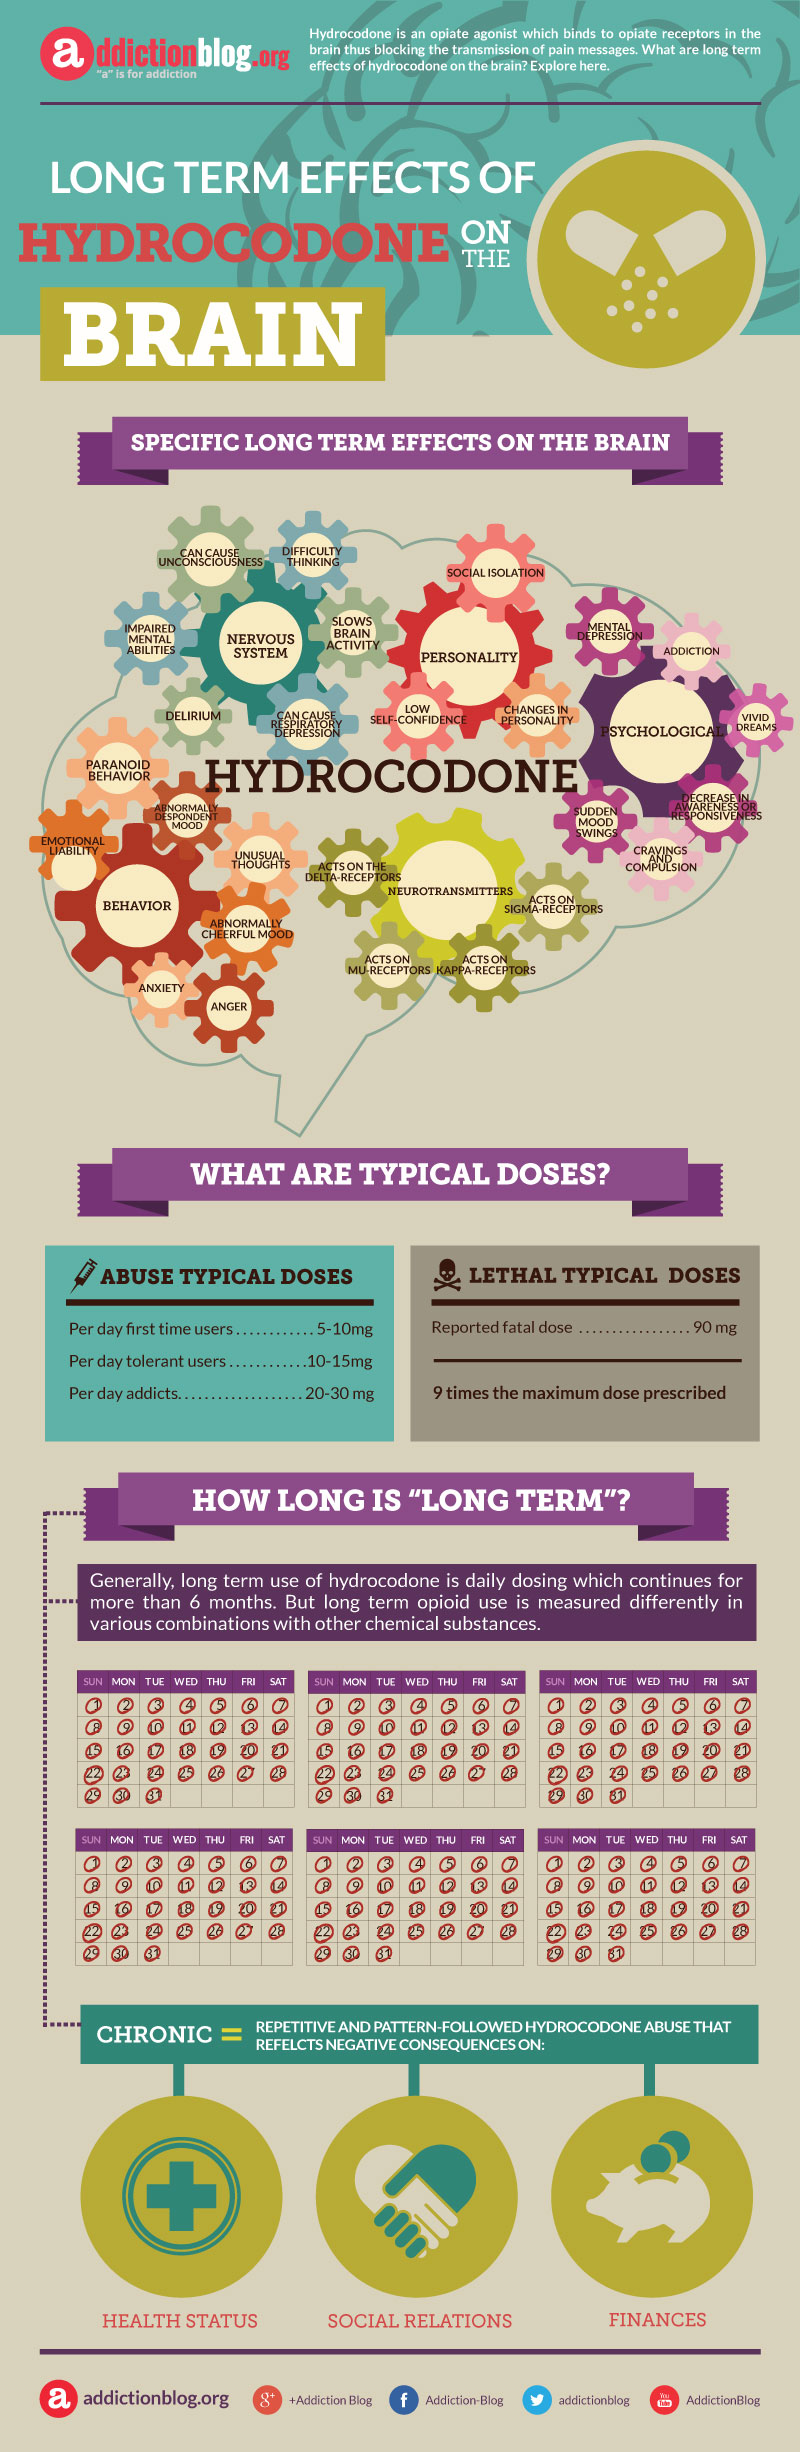 Long term effects of hydrocodone on the brain (INFOGRAPHIC)